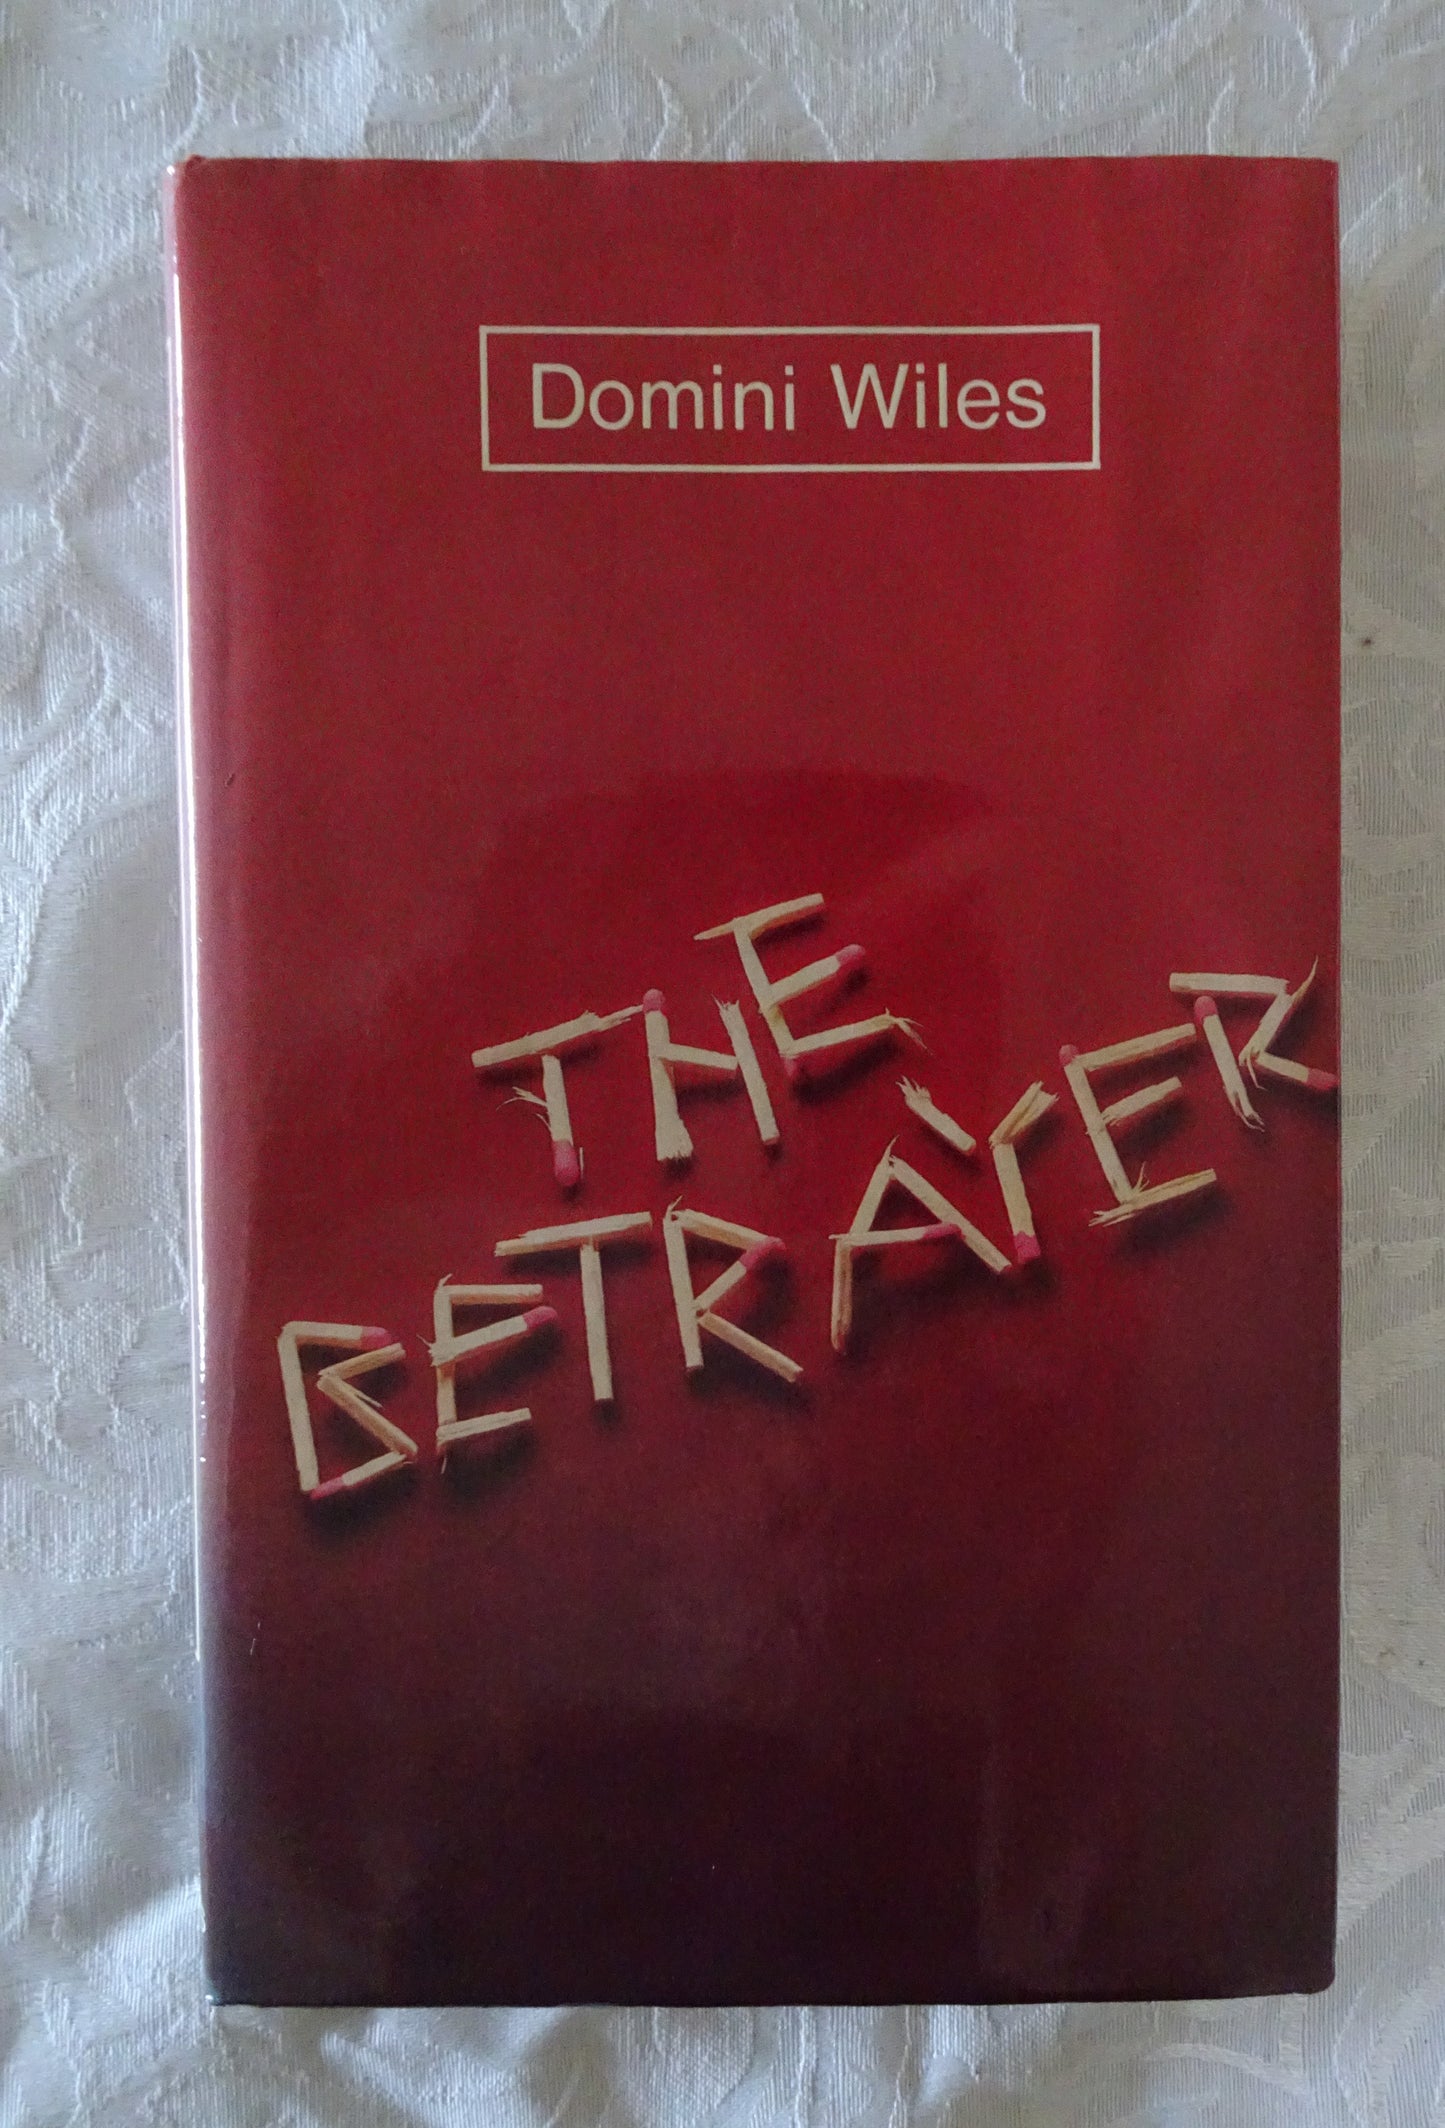 The Betrayer by Domini Wiles